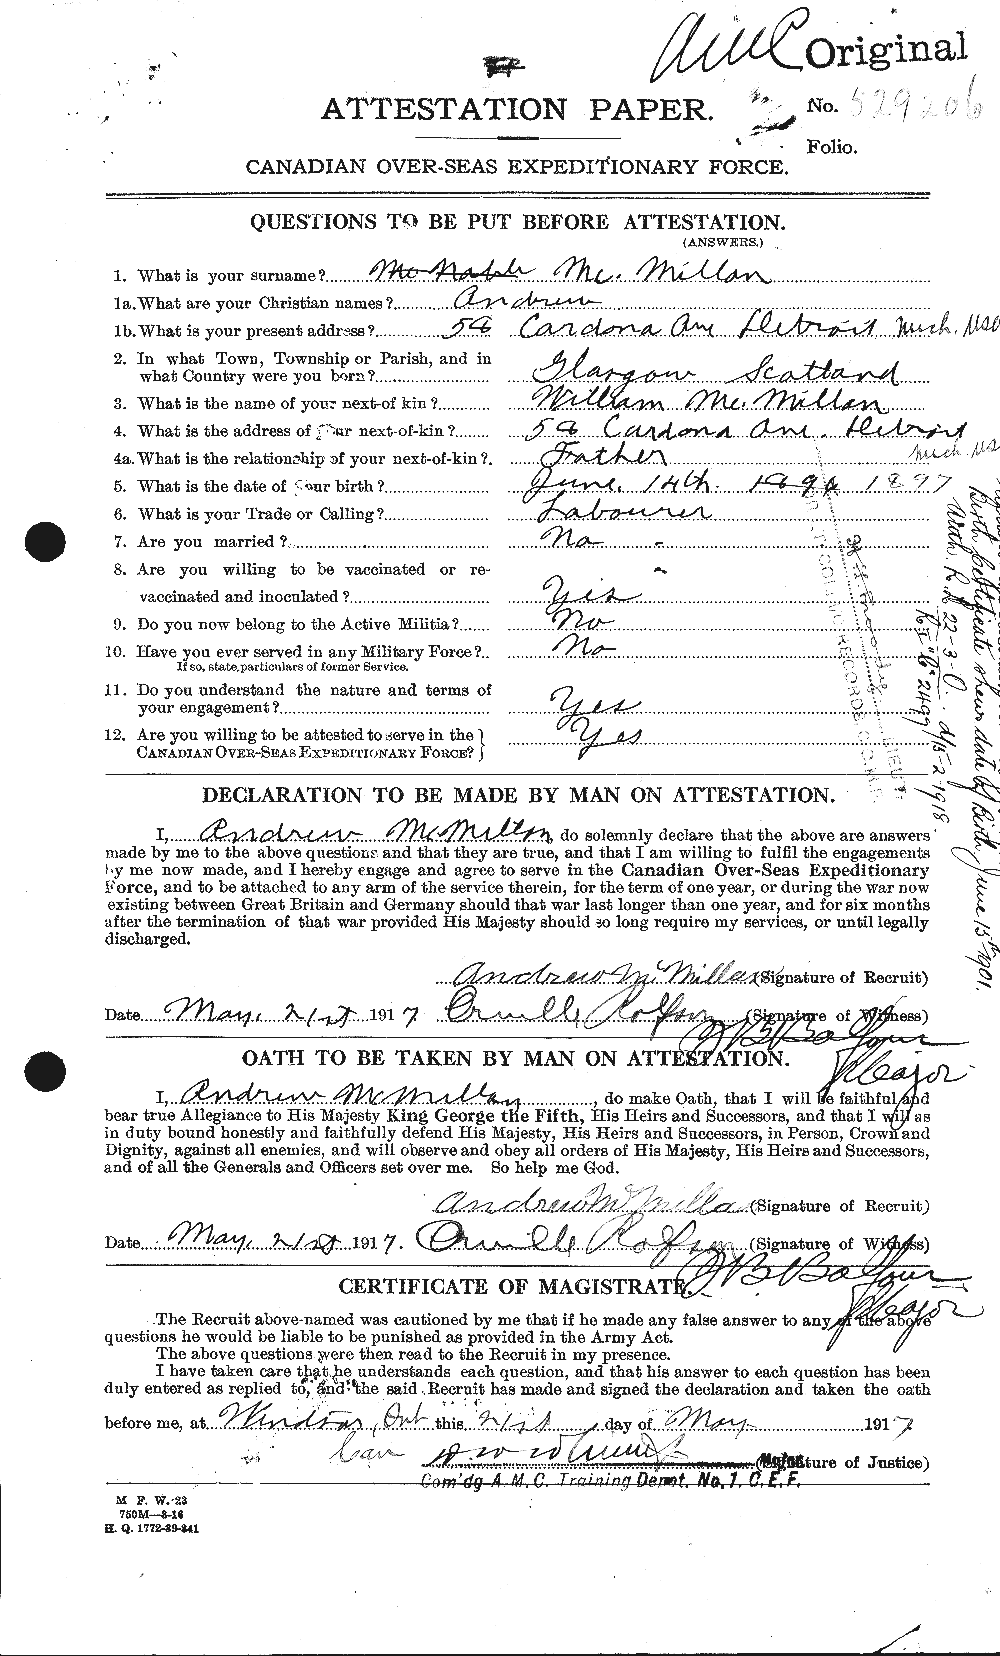 Personnel Records of the First World War - CEF 537498a